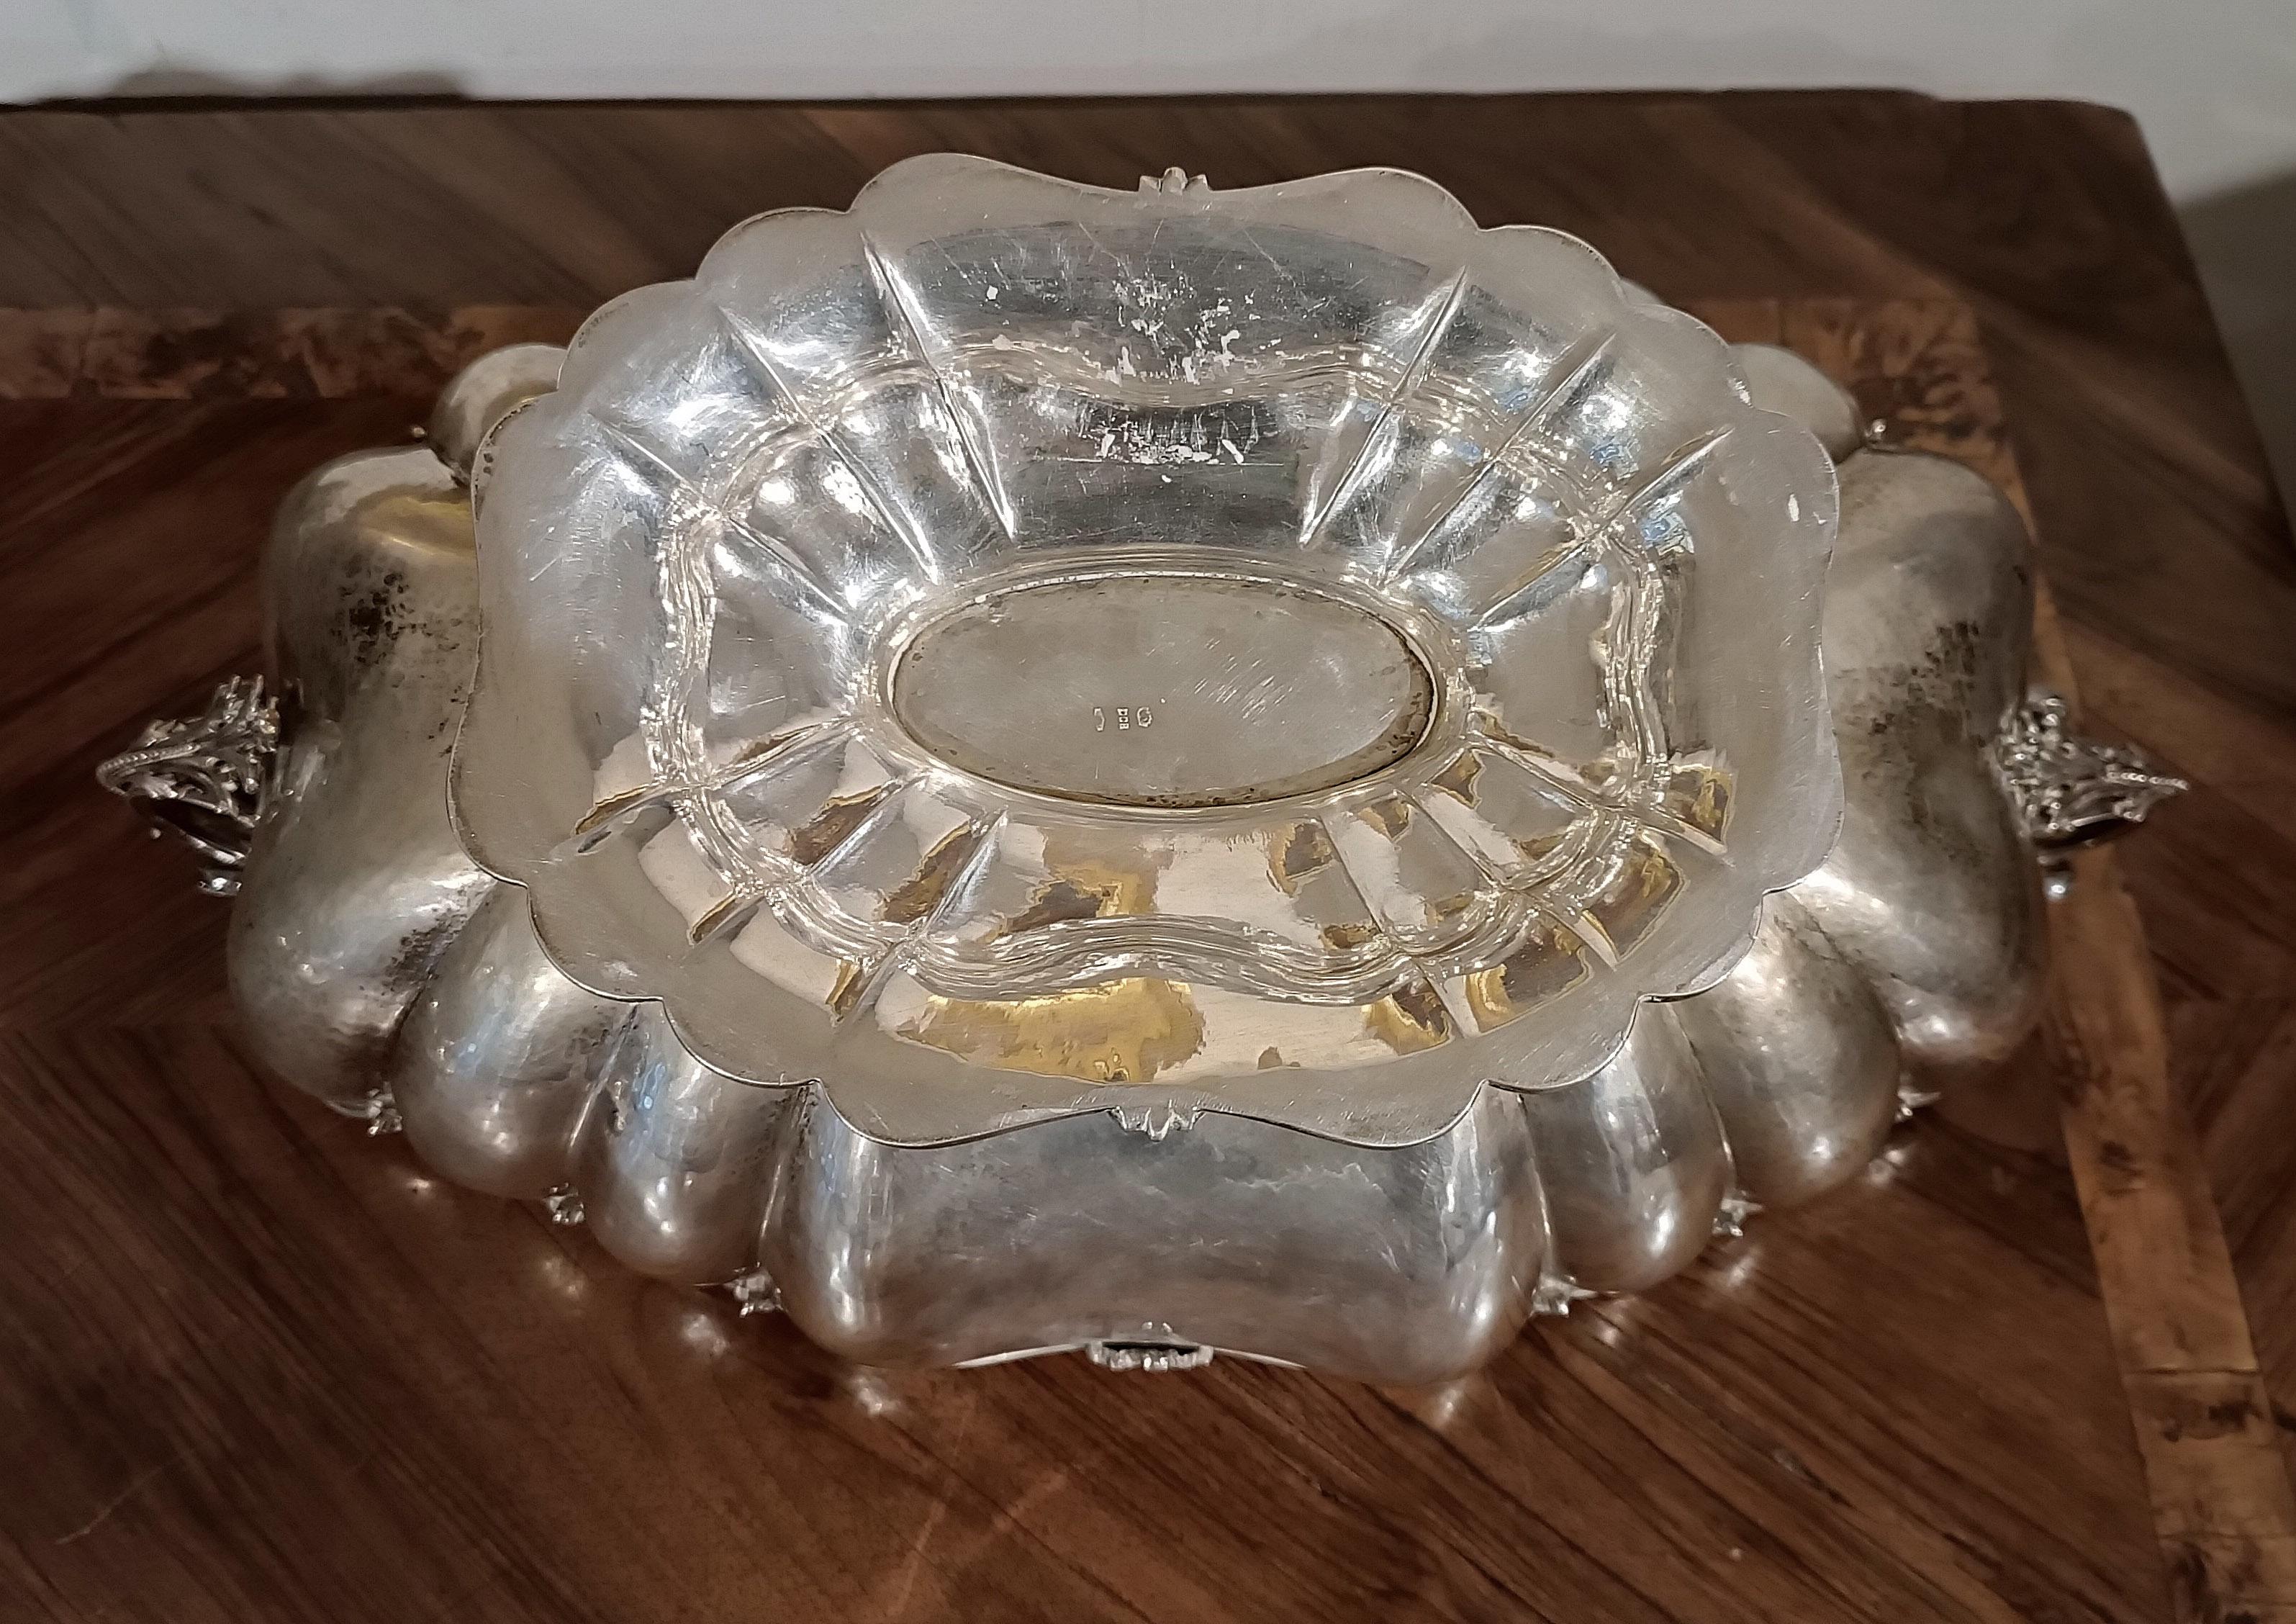 LATE 19th-EARLY 20th CENTURY ITALIAN SILVER CENTERPIECE For Sale 2